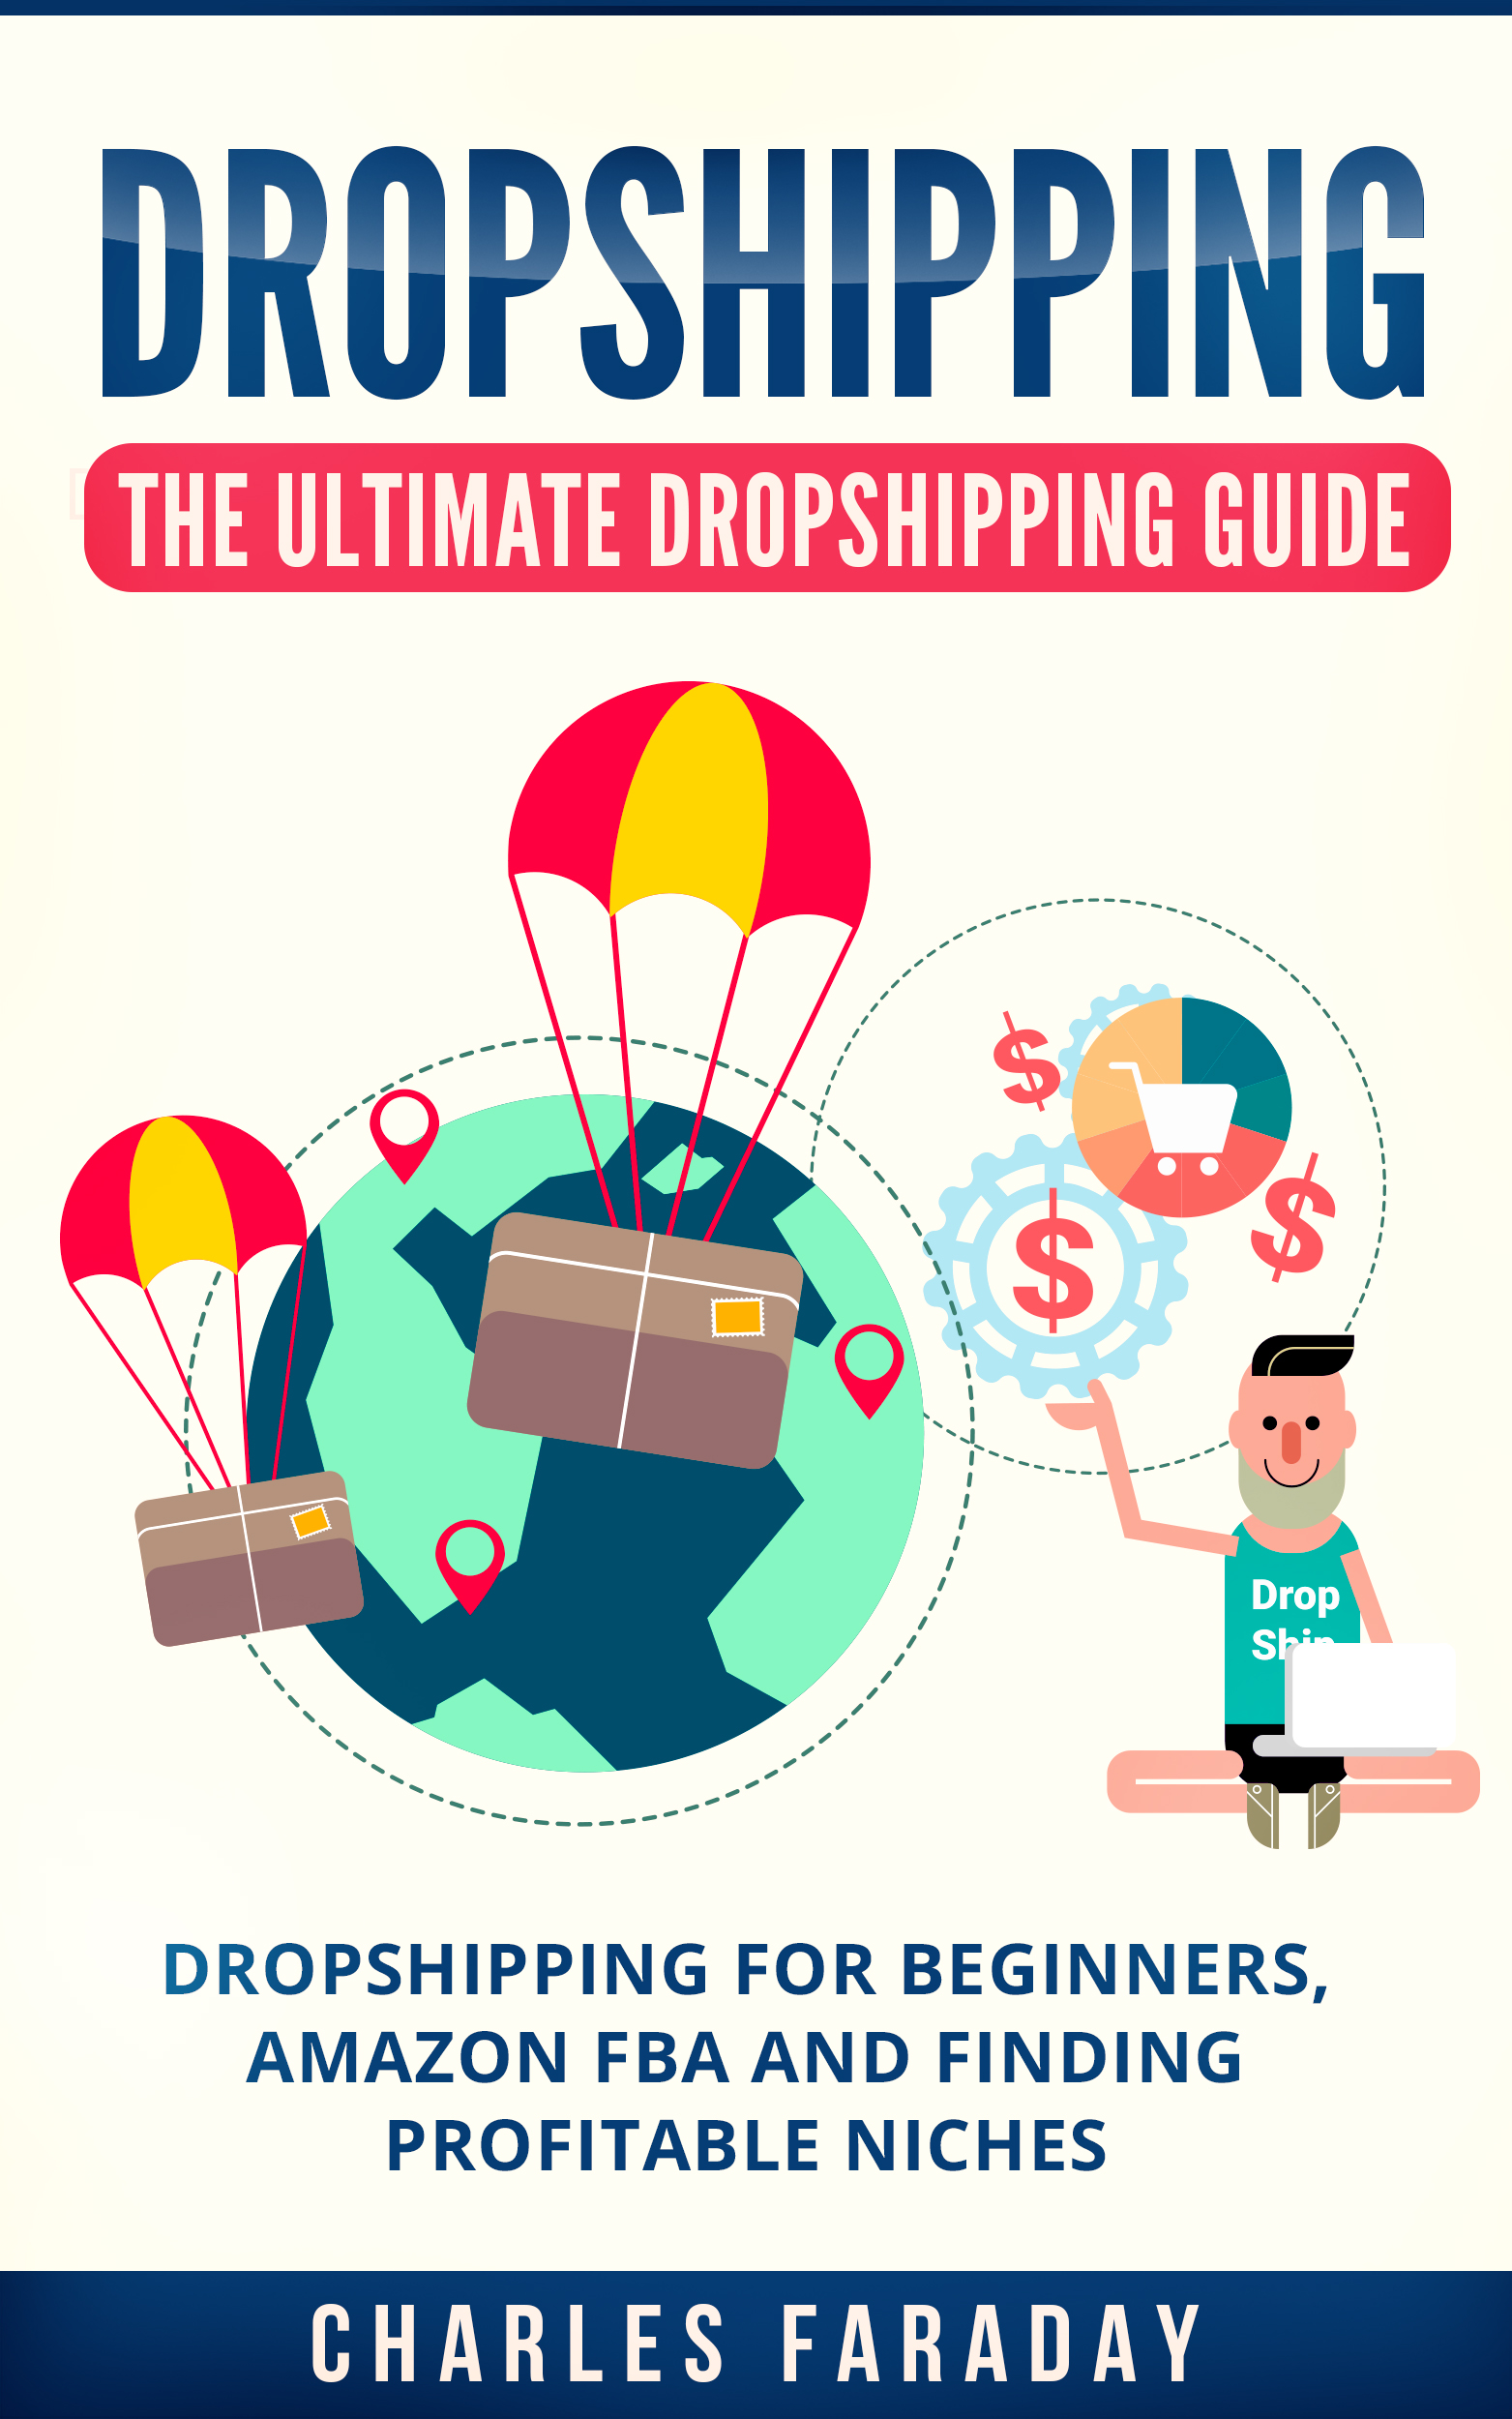 FREE: Dropshipping: The Ultimate Dropshipping Guide by Charles Faraday